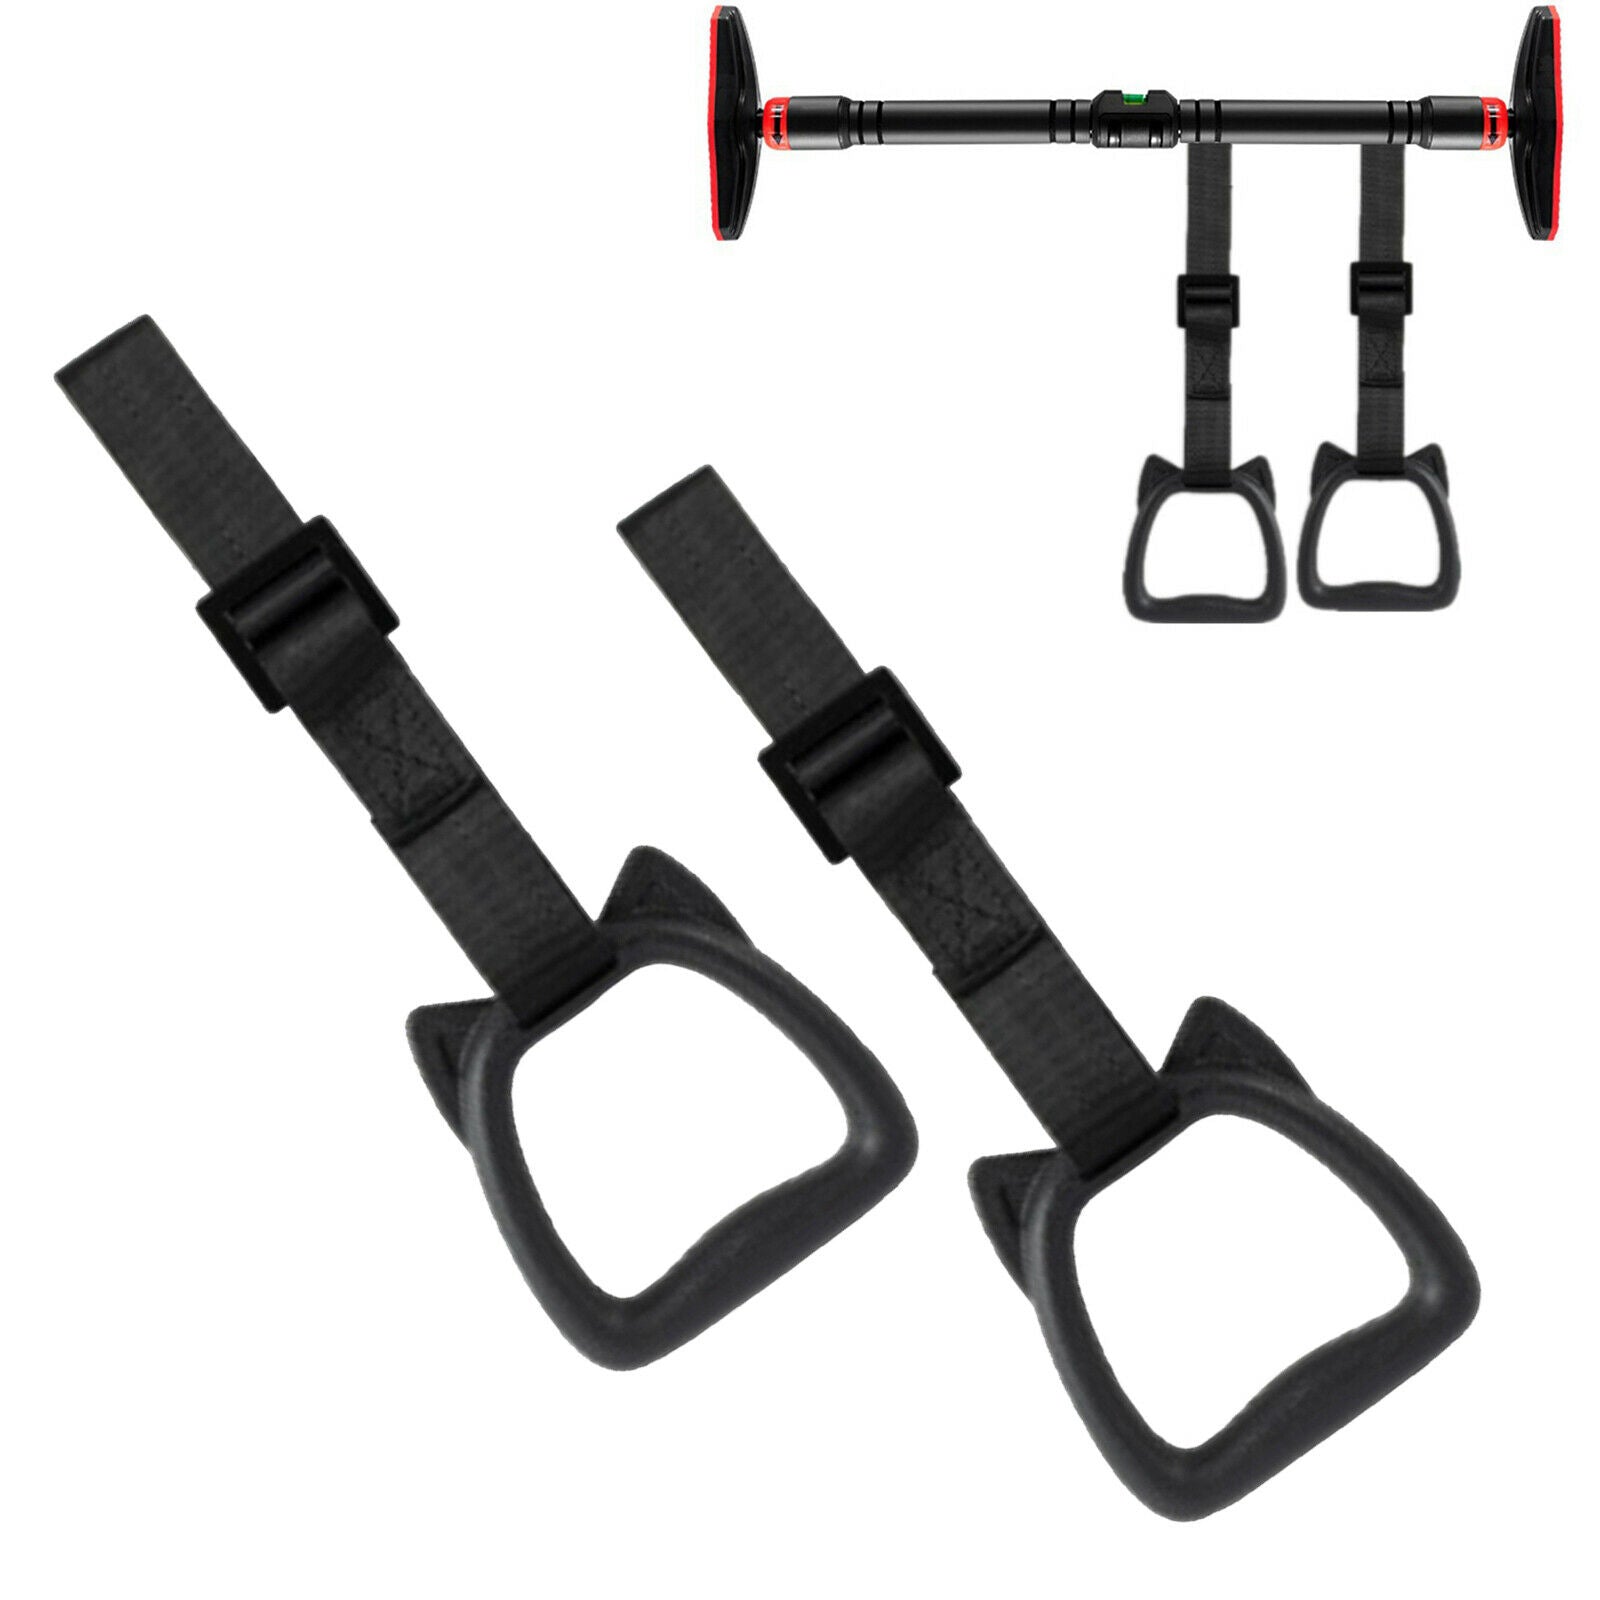 T-bar Row Pull-Up Straps Handles Training Chinning Bar Attachment Hand Grip